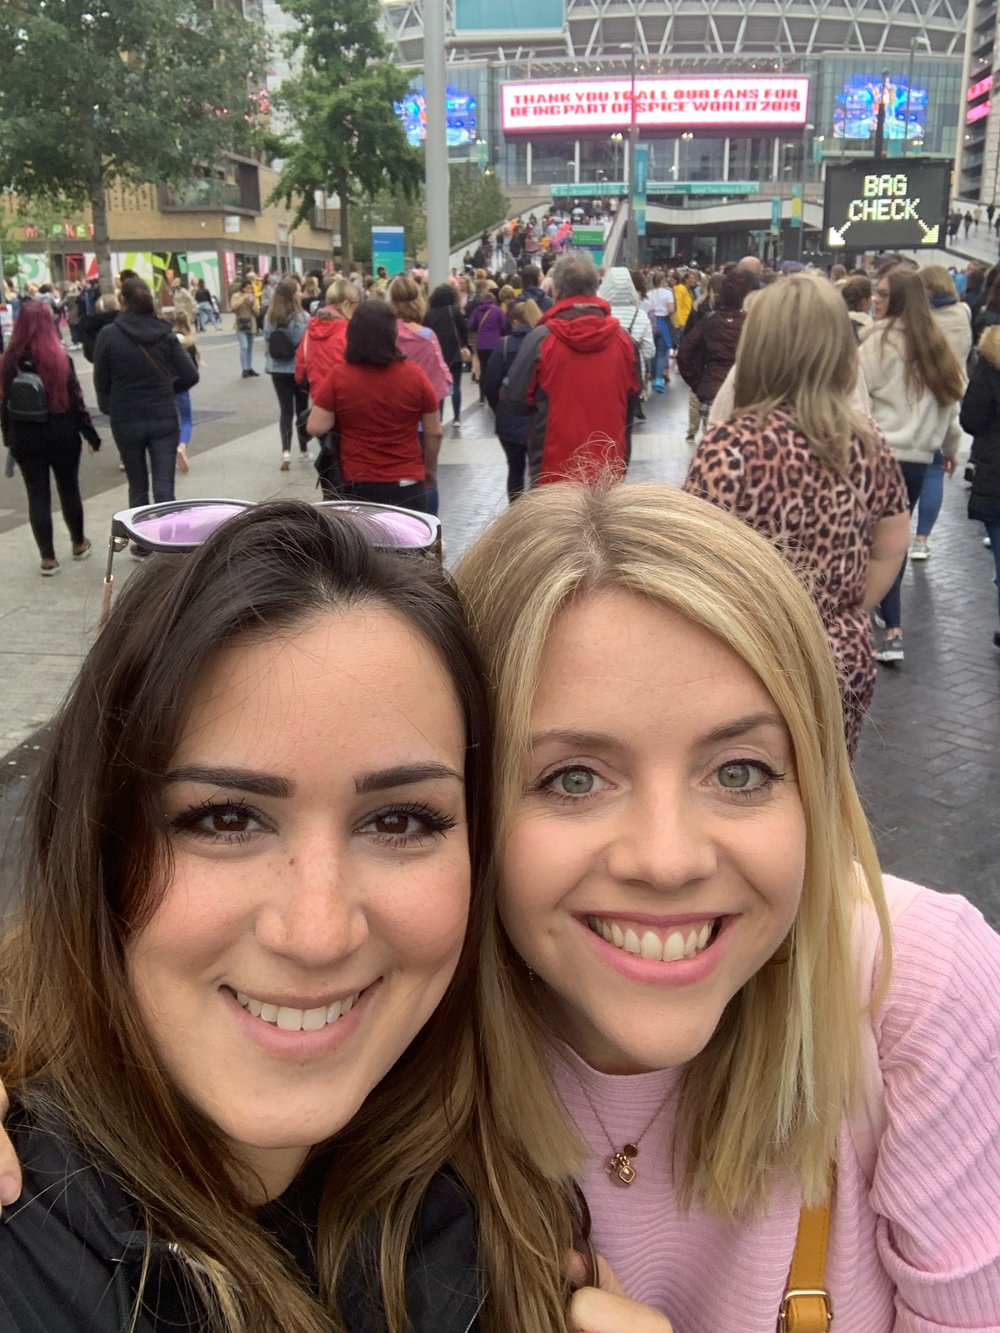 Die-hard Spice Girls fans Punteha and Sian arriving at Wembley with thousands of fans